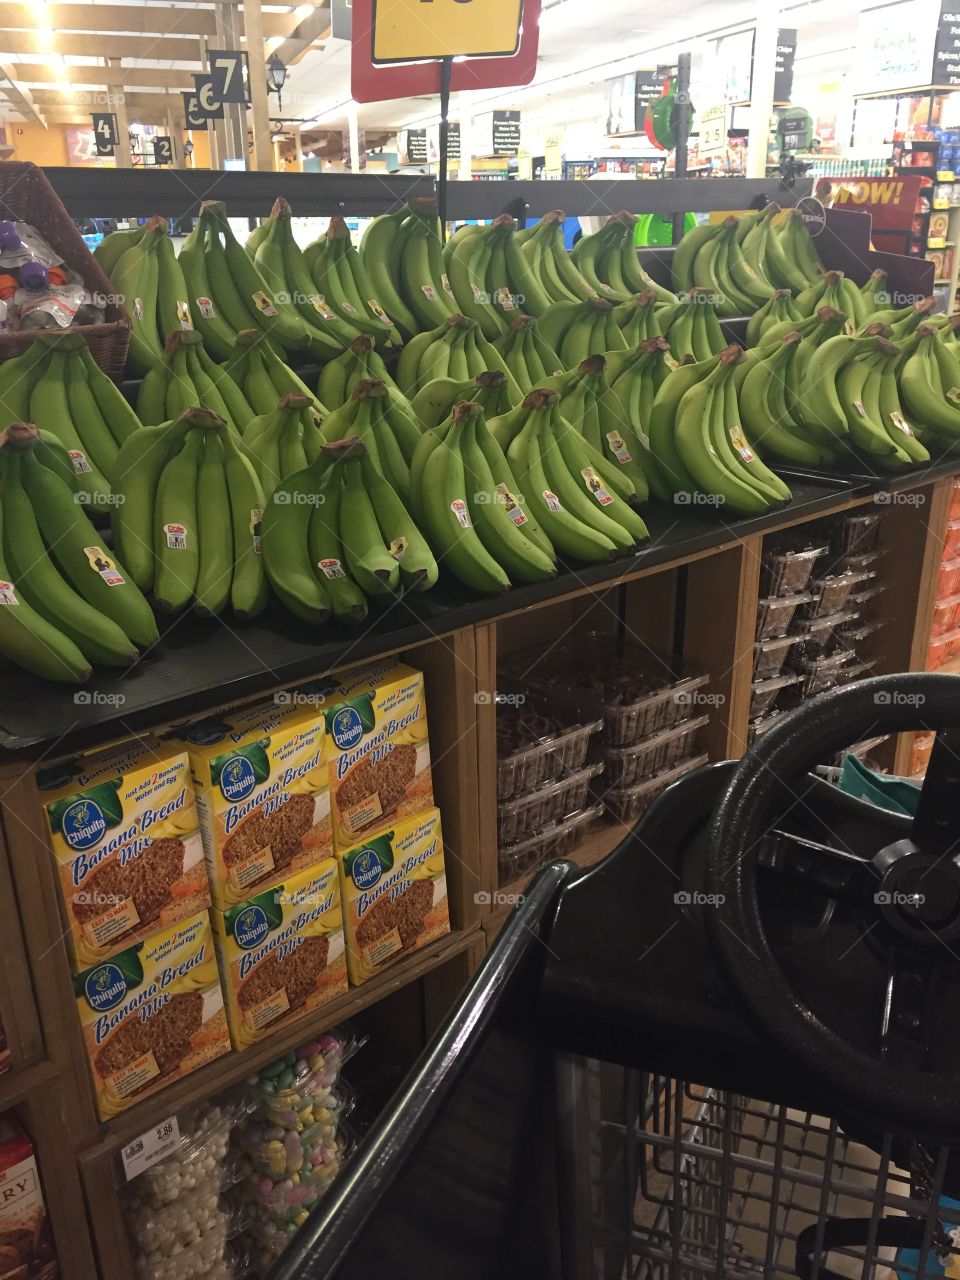 Grocery store with green bananas on display 